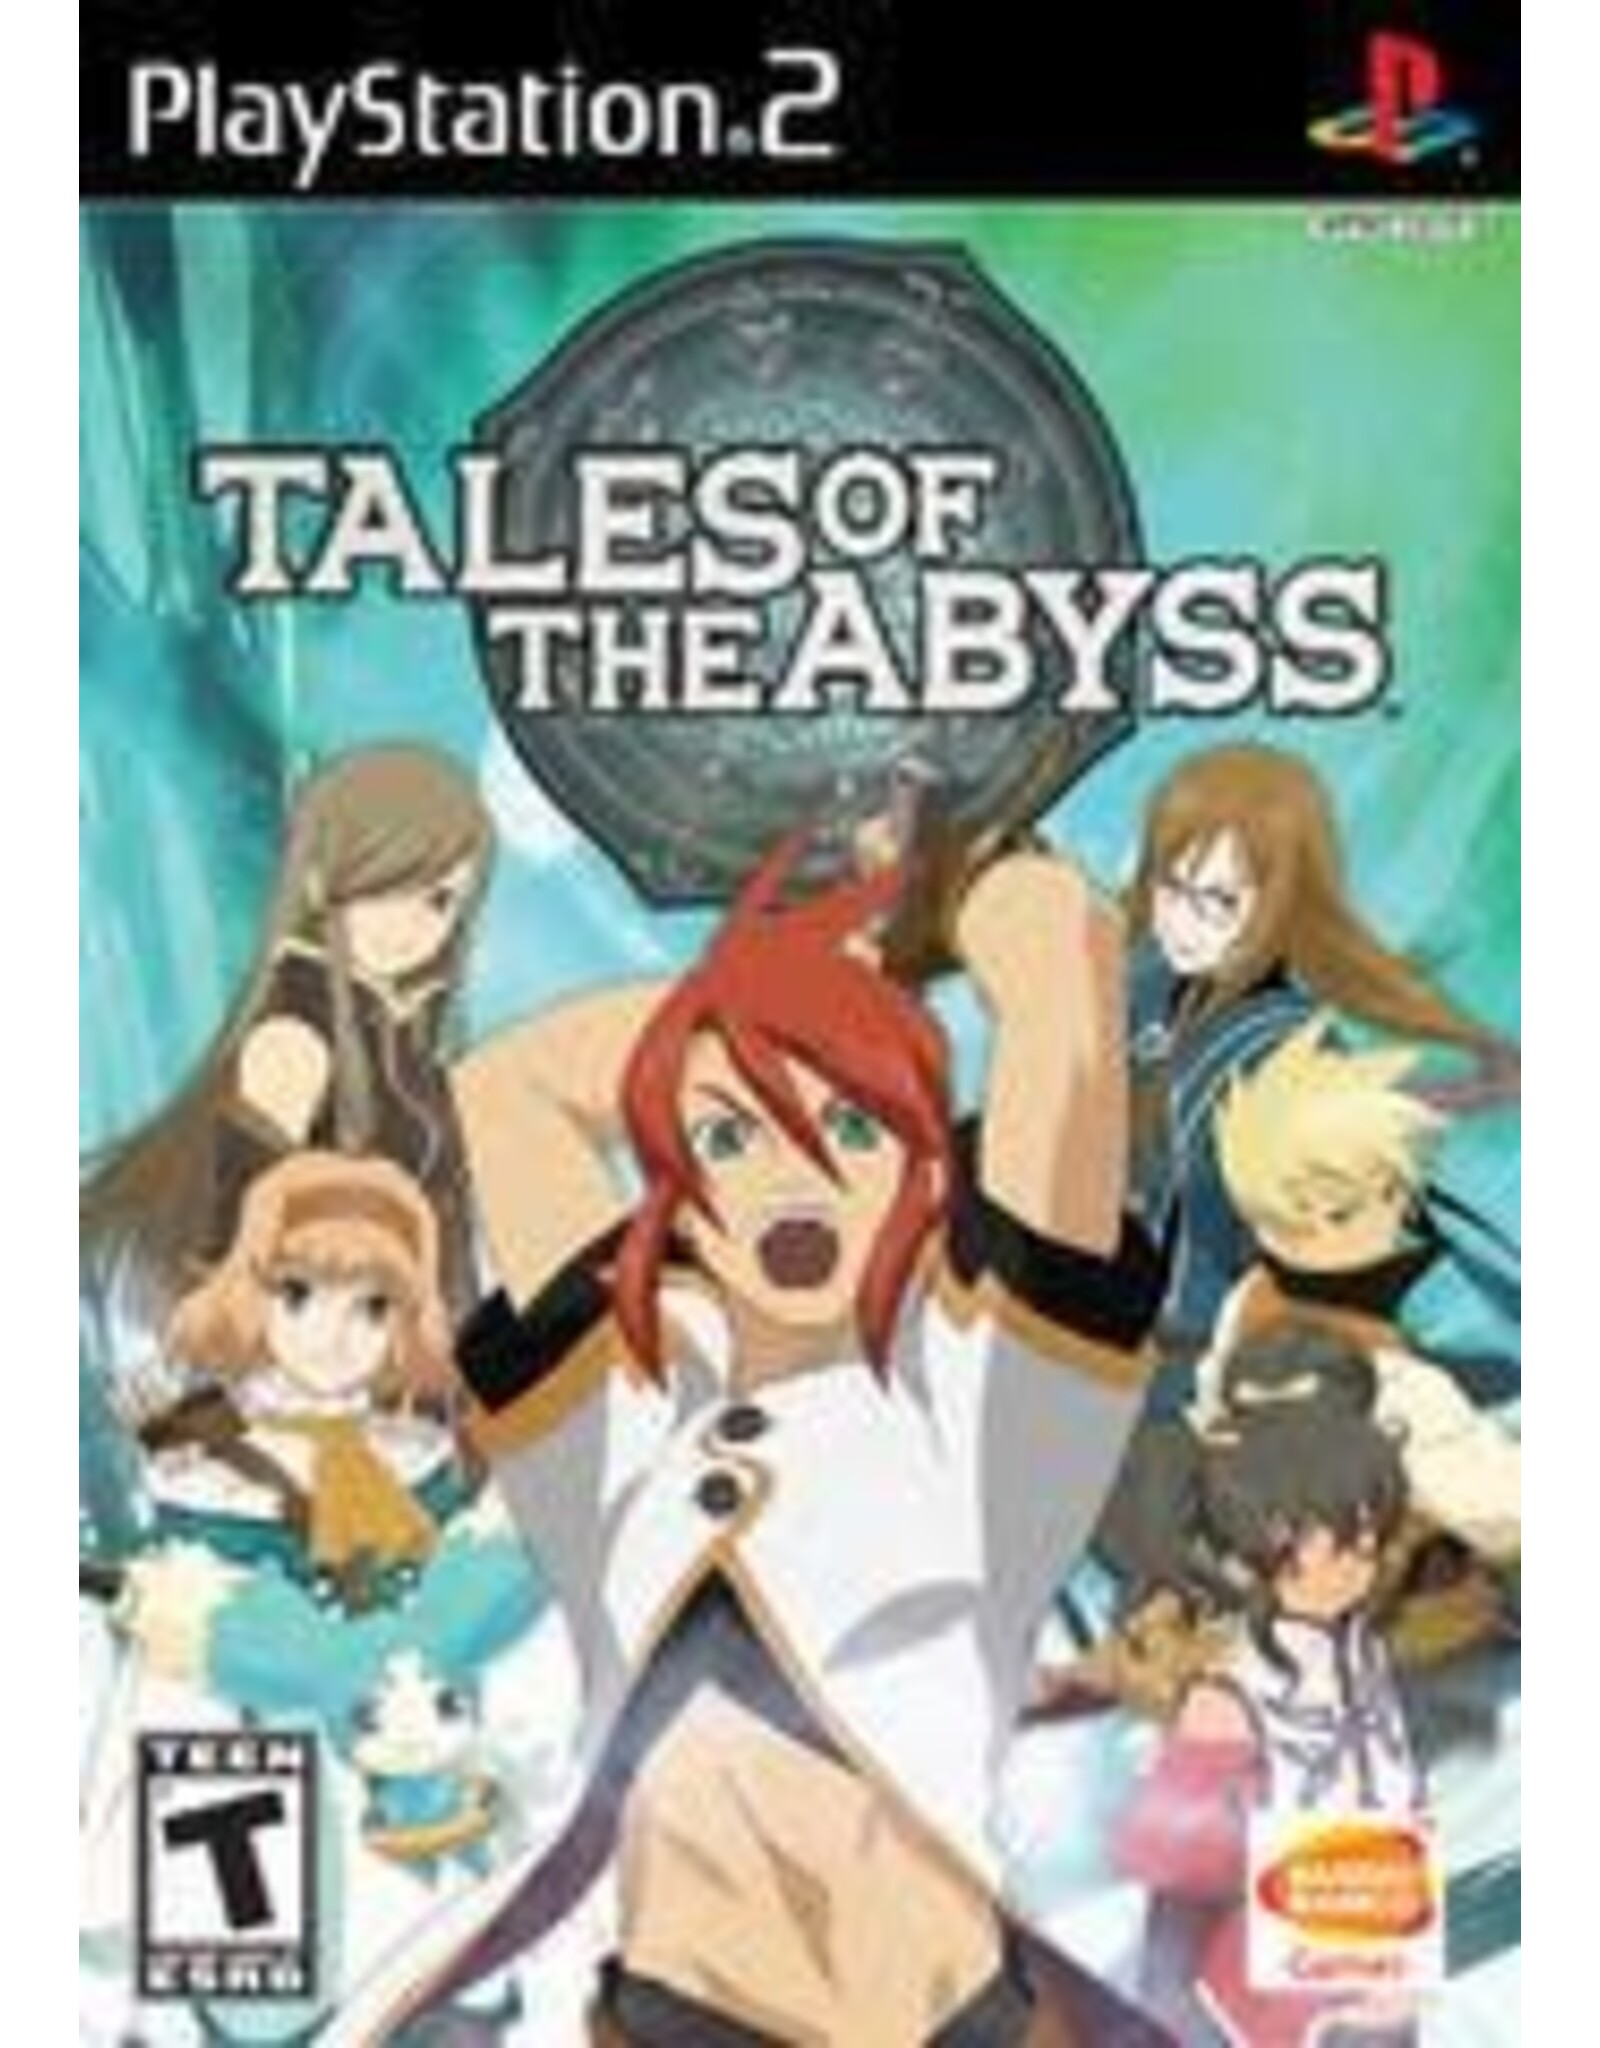 Playstation 2 Tales of the Abyss (CiB, Damaged Sleeve)